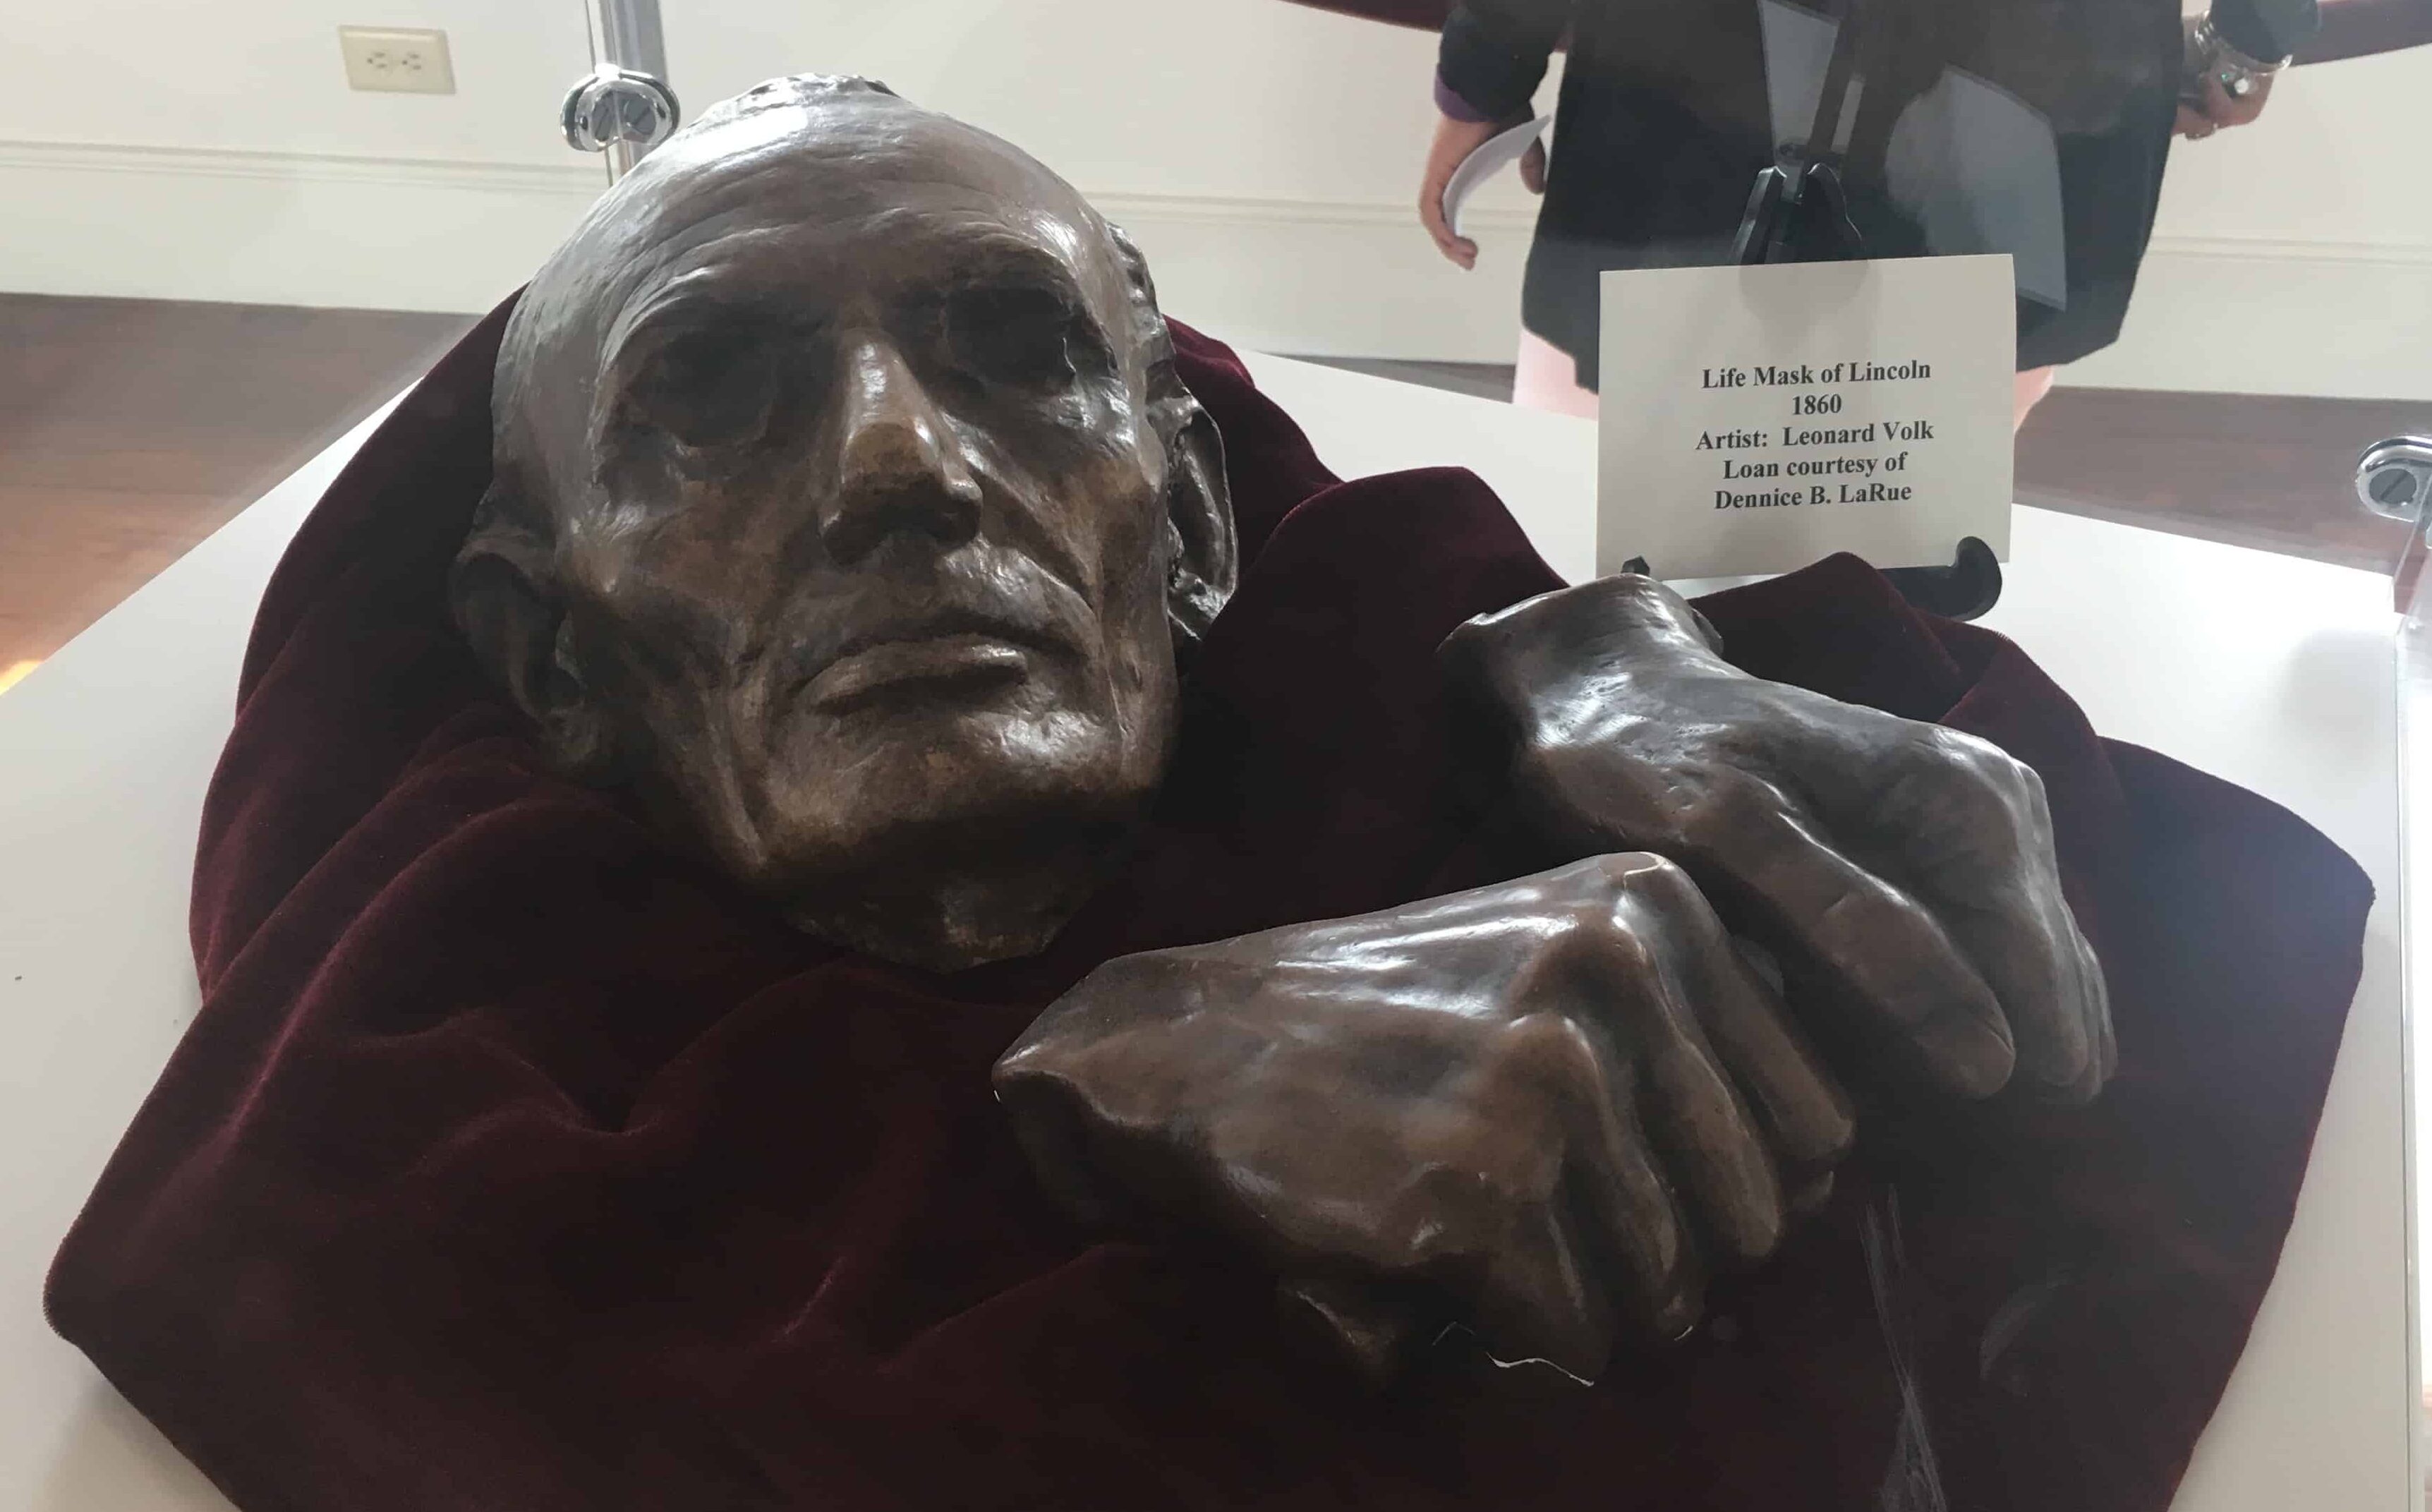 Lincoln's life mask at the Lincoln Museum in Hodgenville, Kentucky